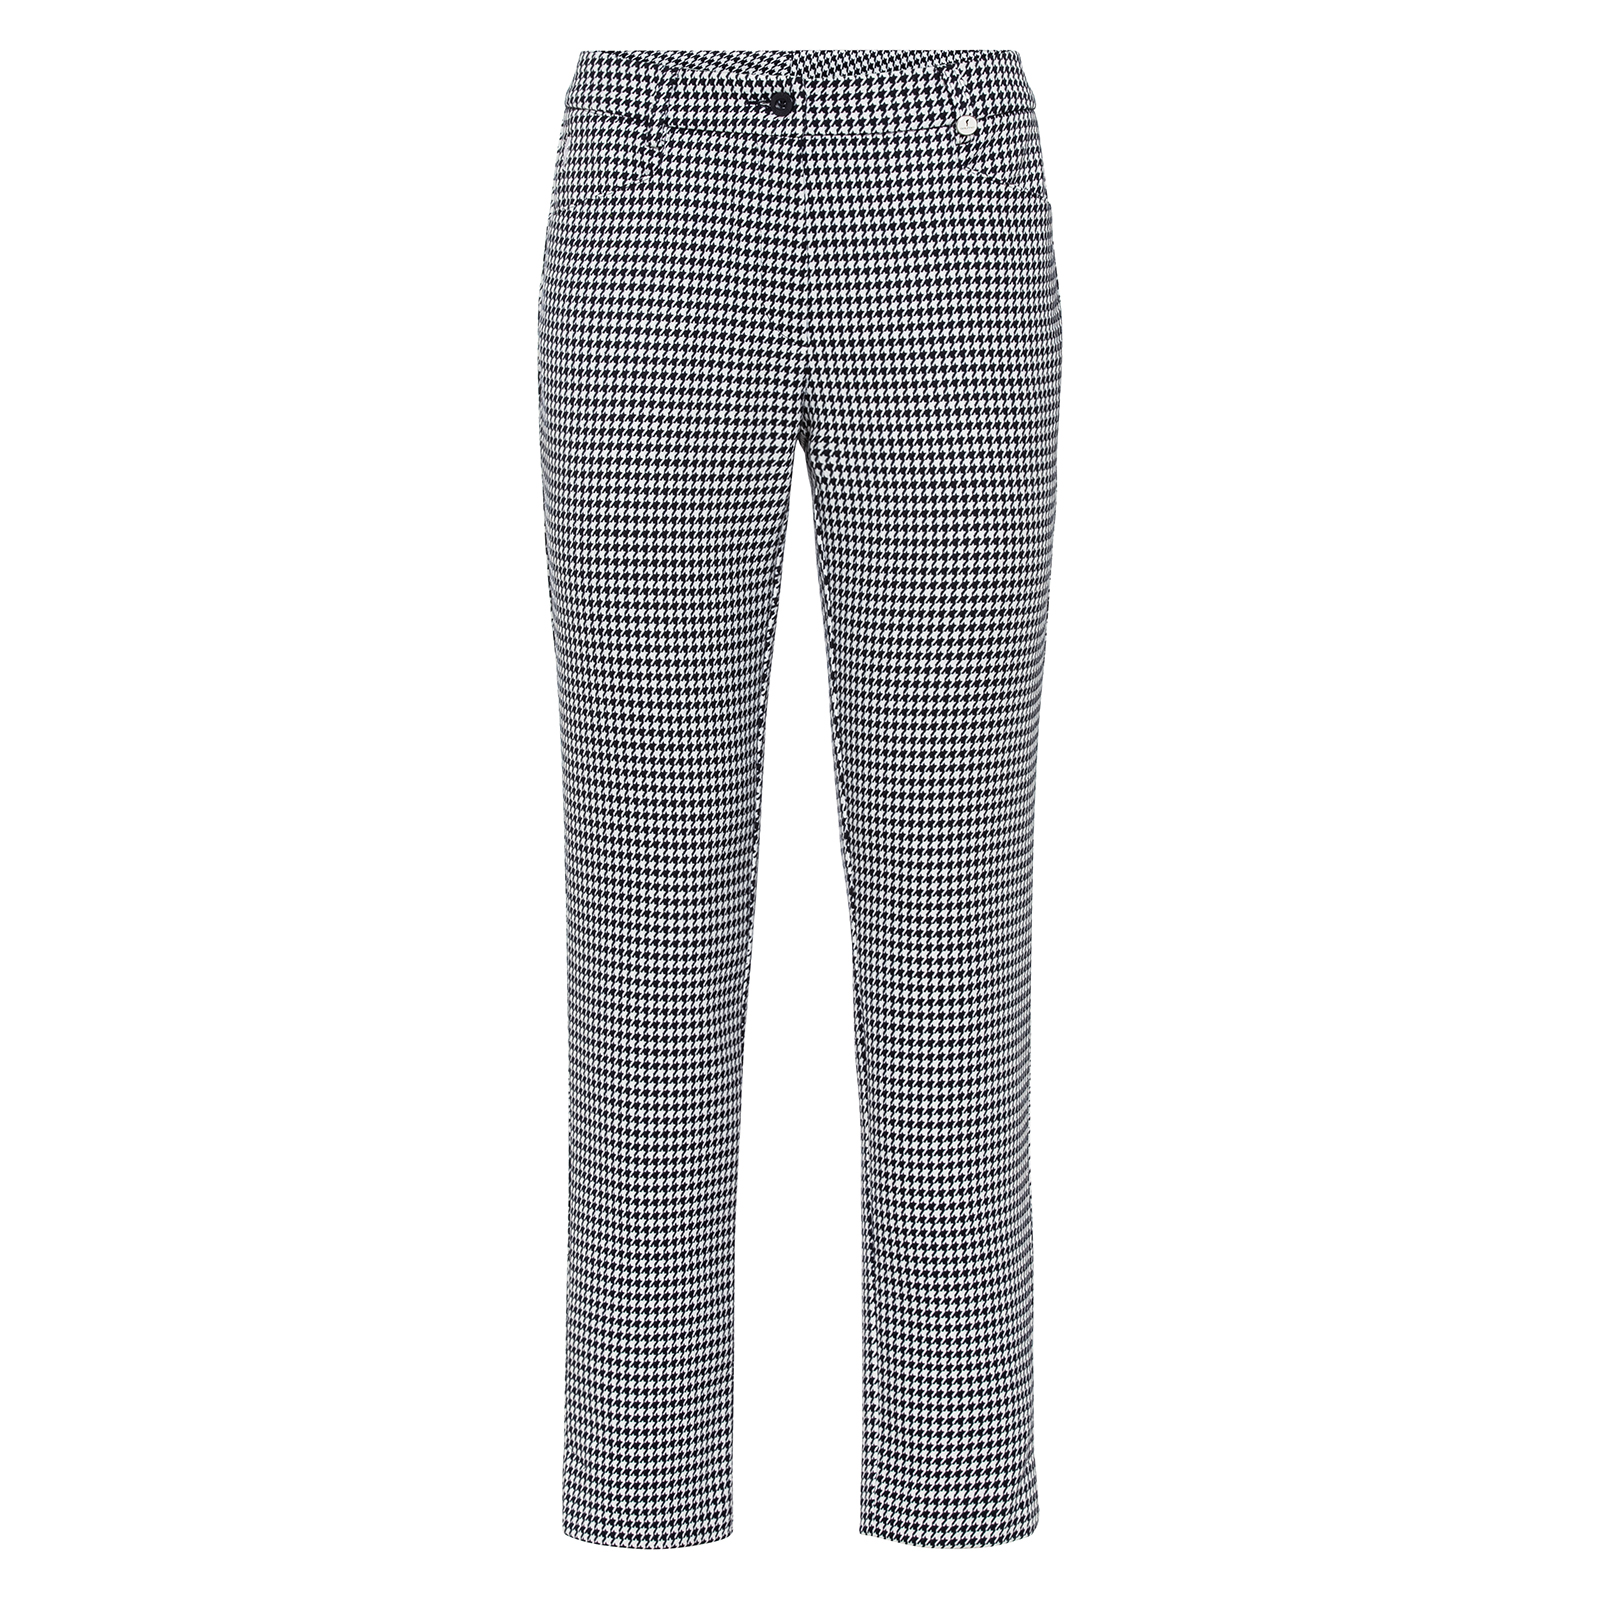 Ladies' regular fit 7/8-length houndstooth golf trousers